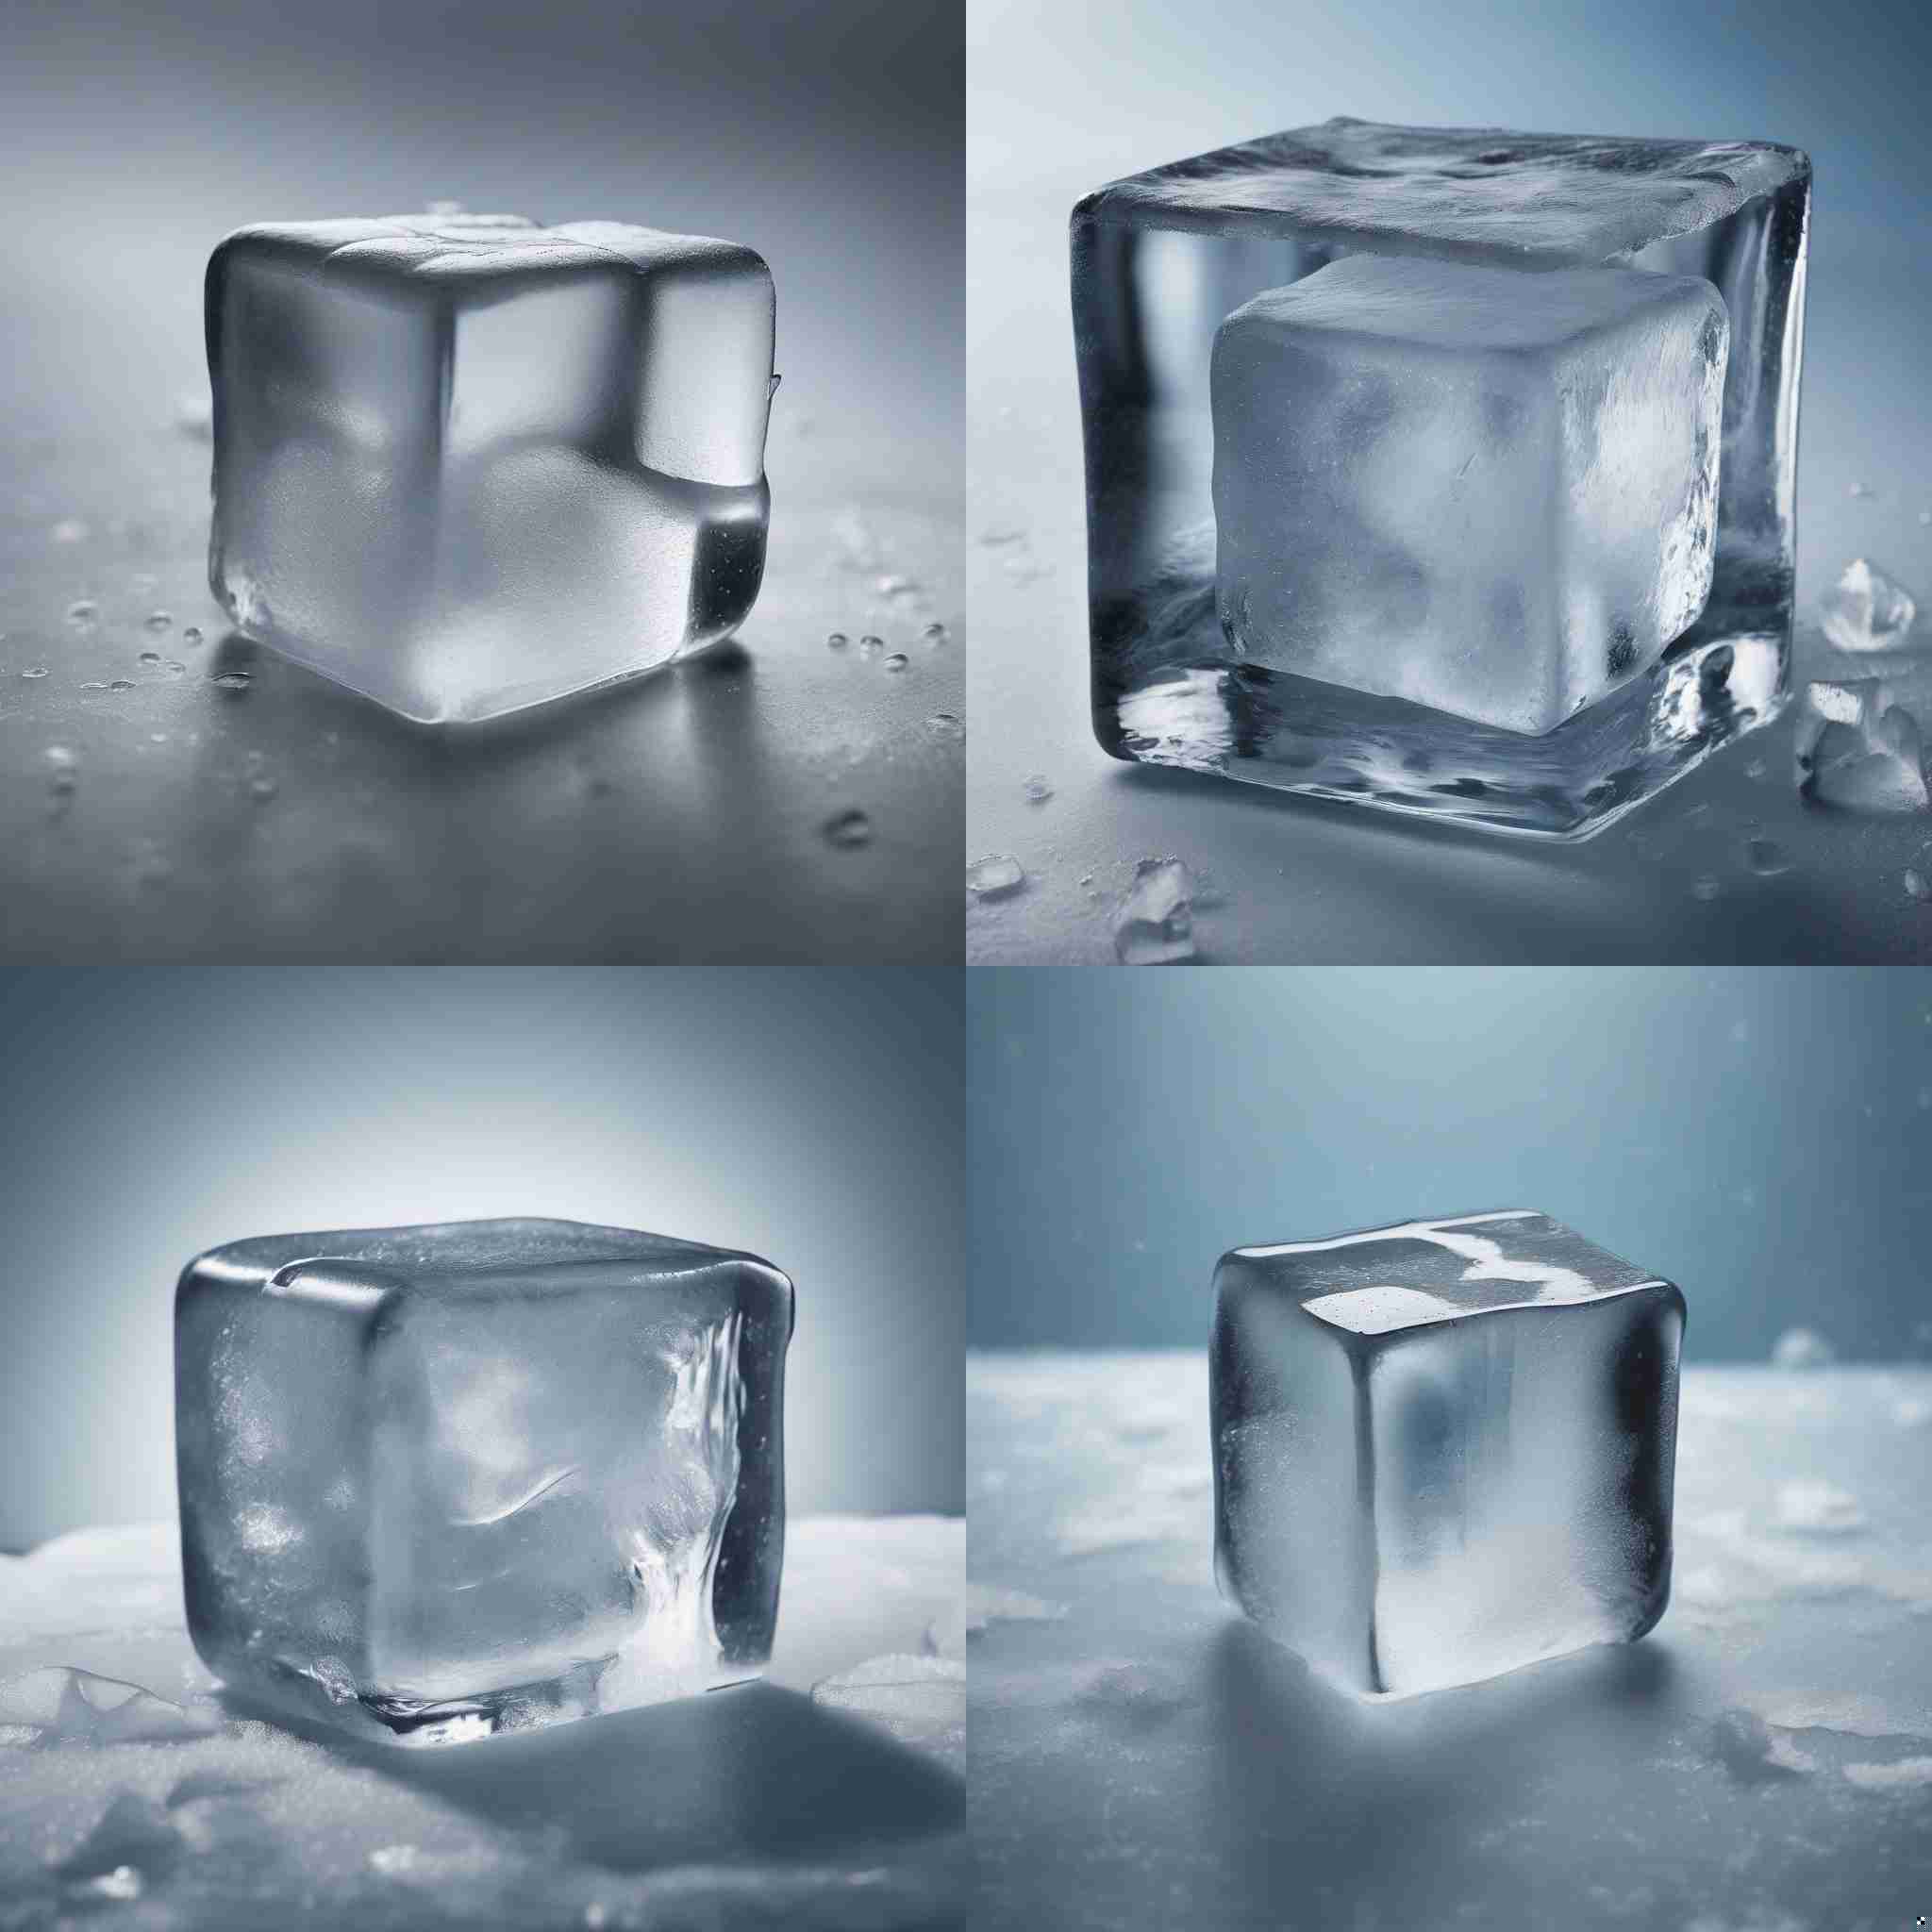 An ice cube in a freezer